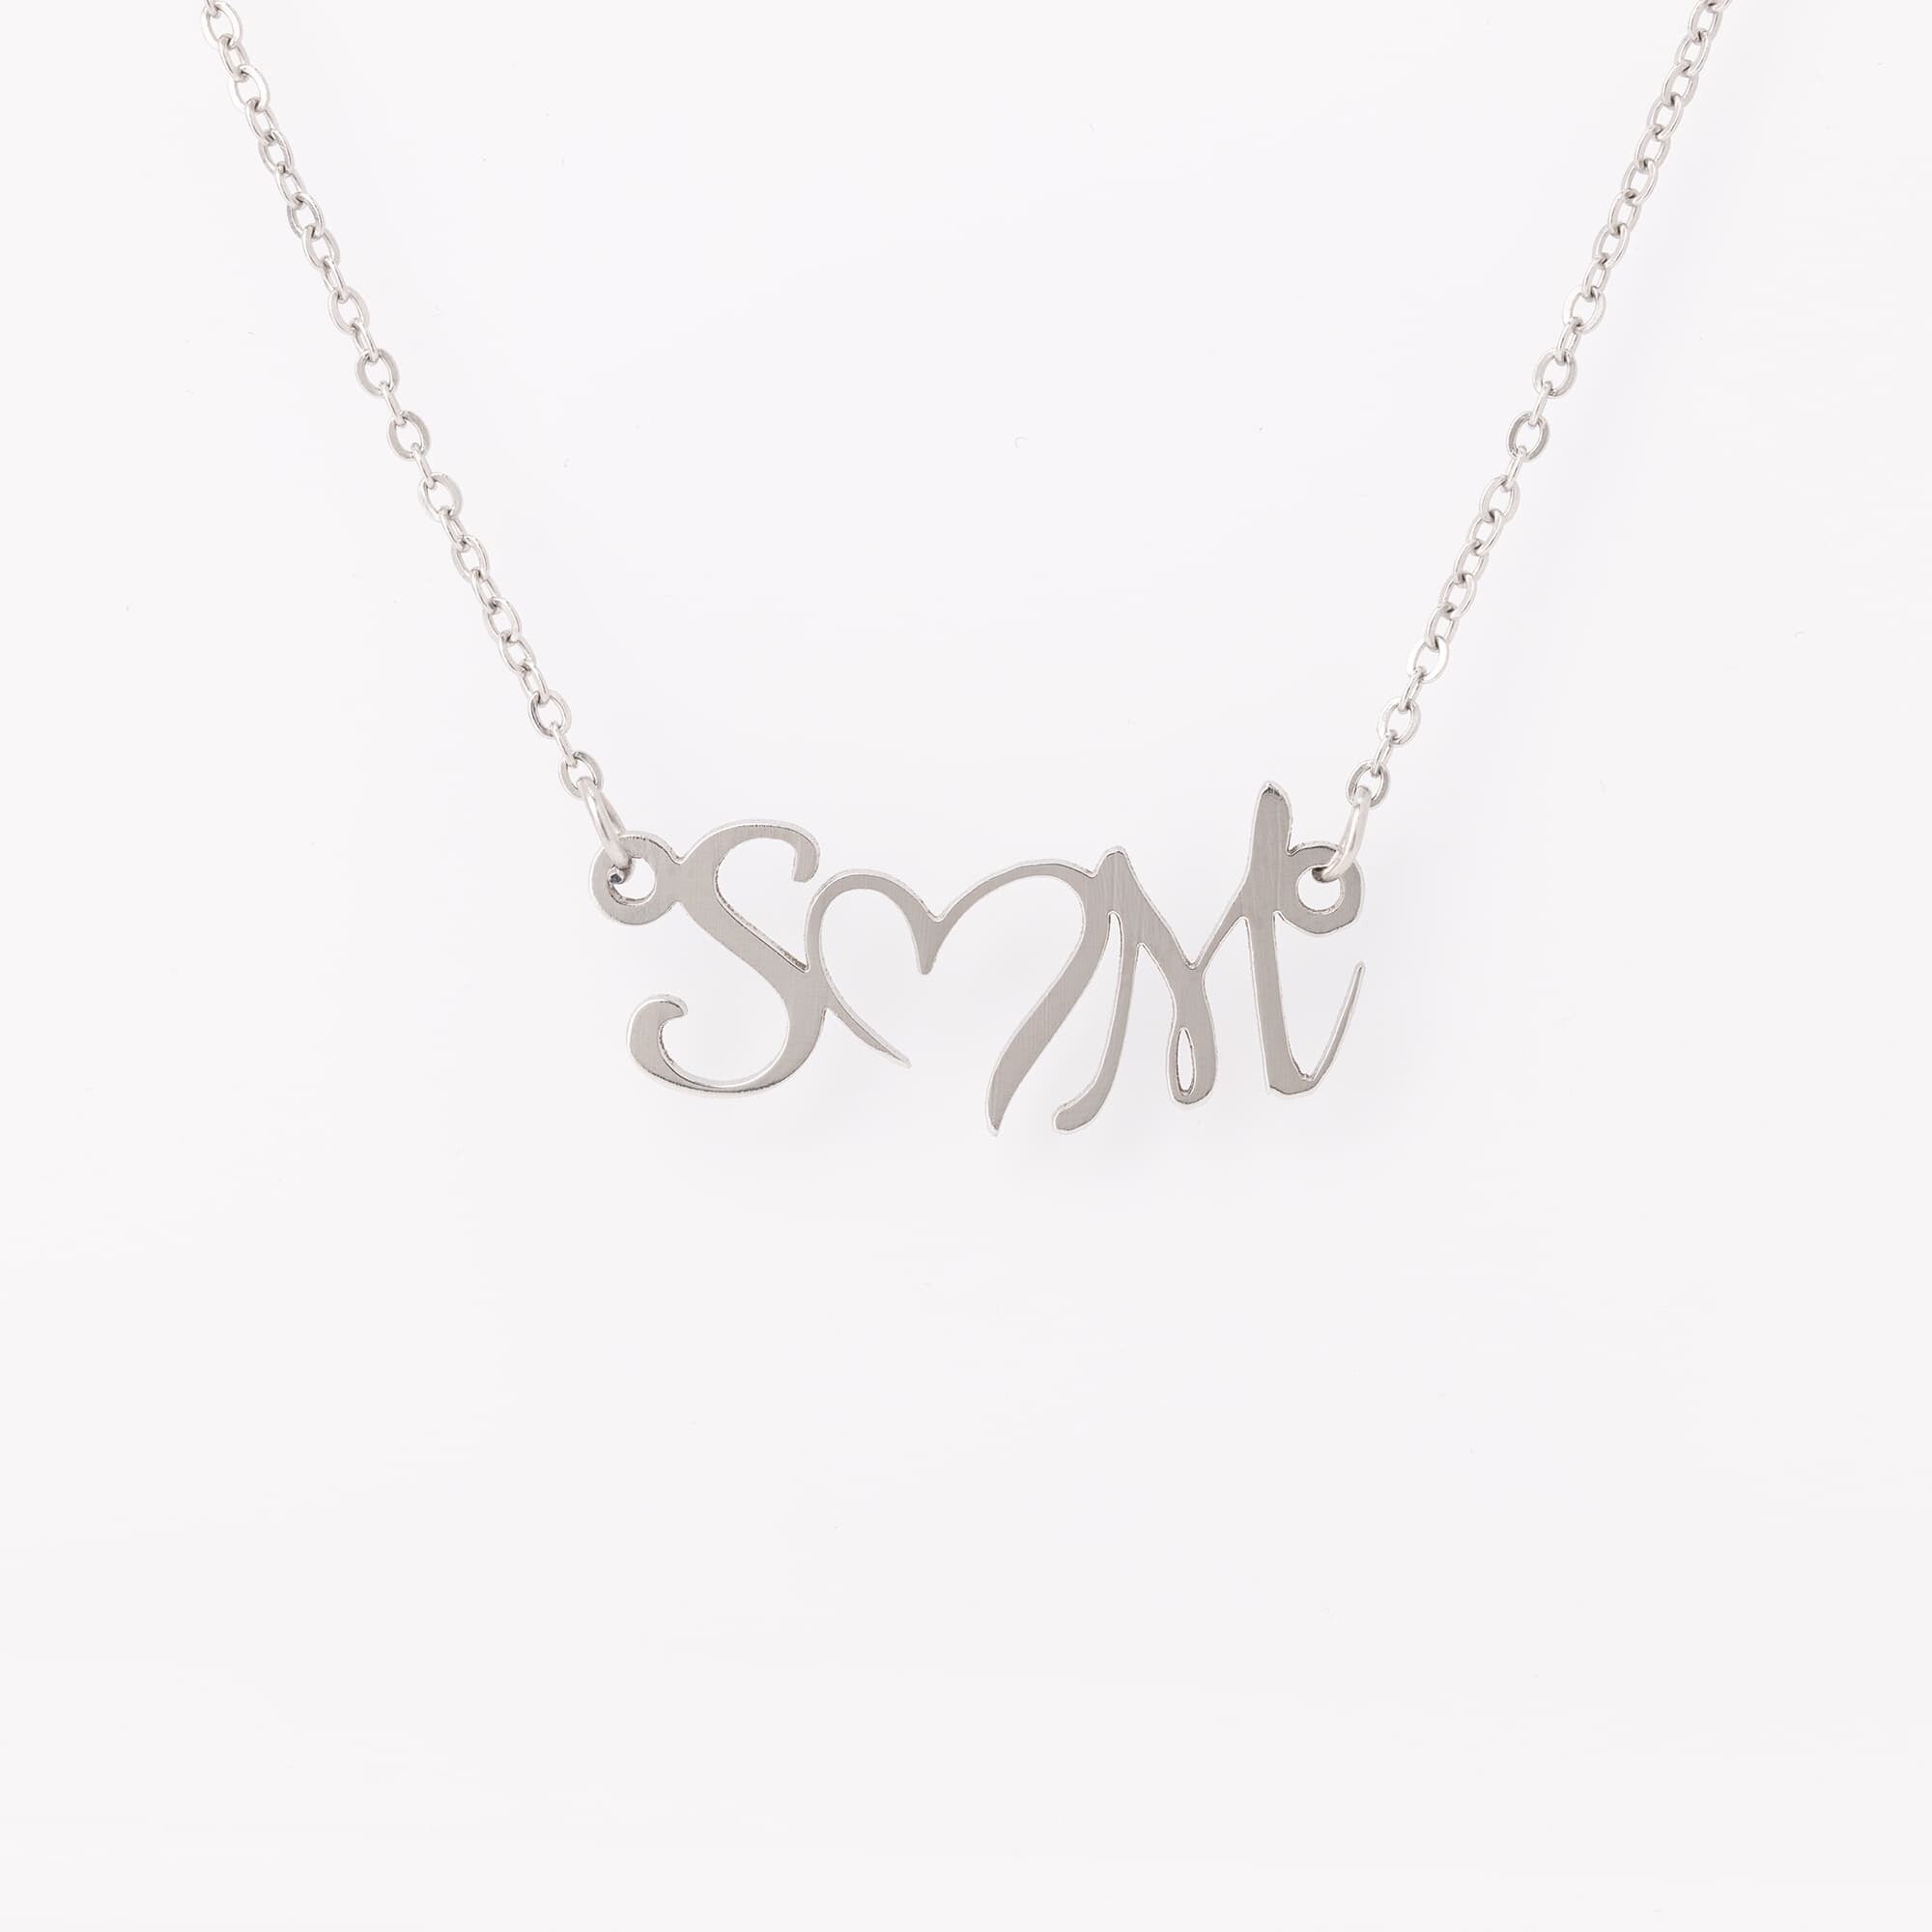 Personalized birthday gifts for mom